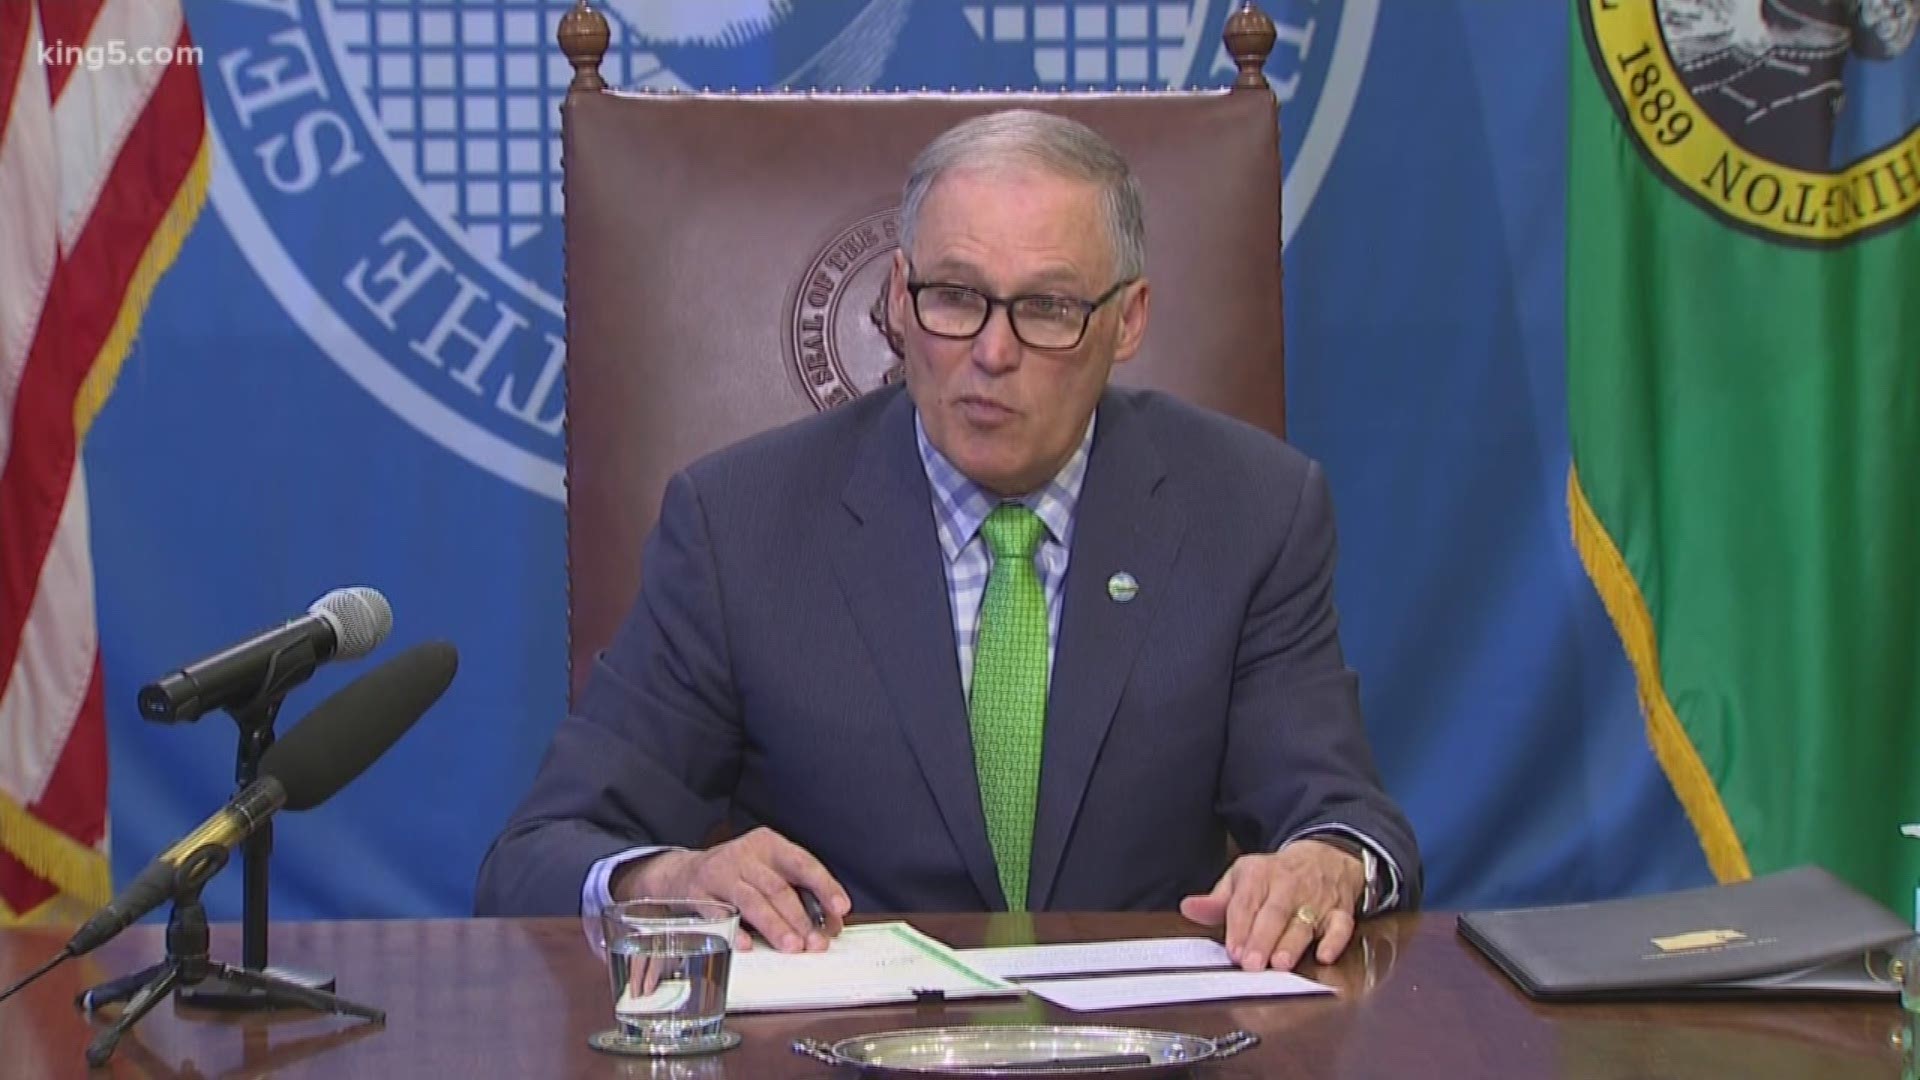 Gov. Inslee has signed several bills into law that allow for more relief efforts during the coronavirus outbreak.